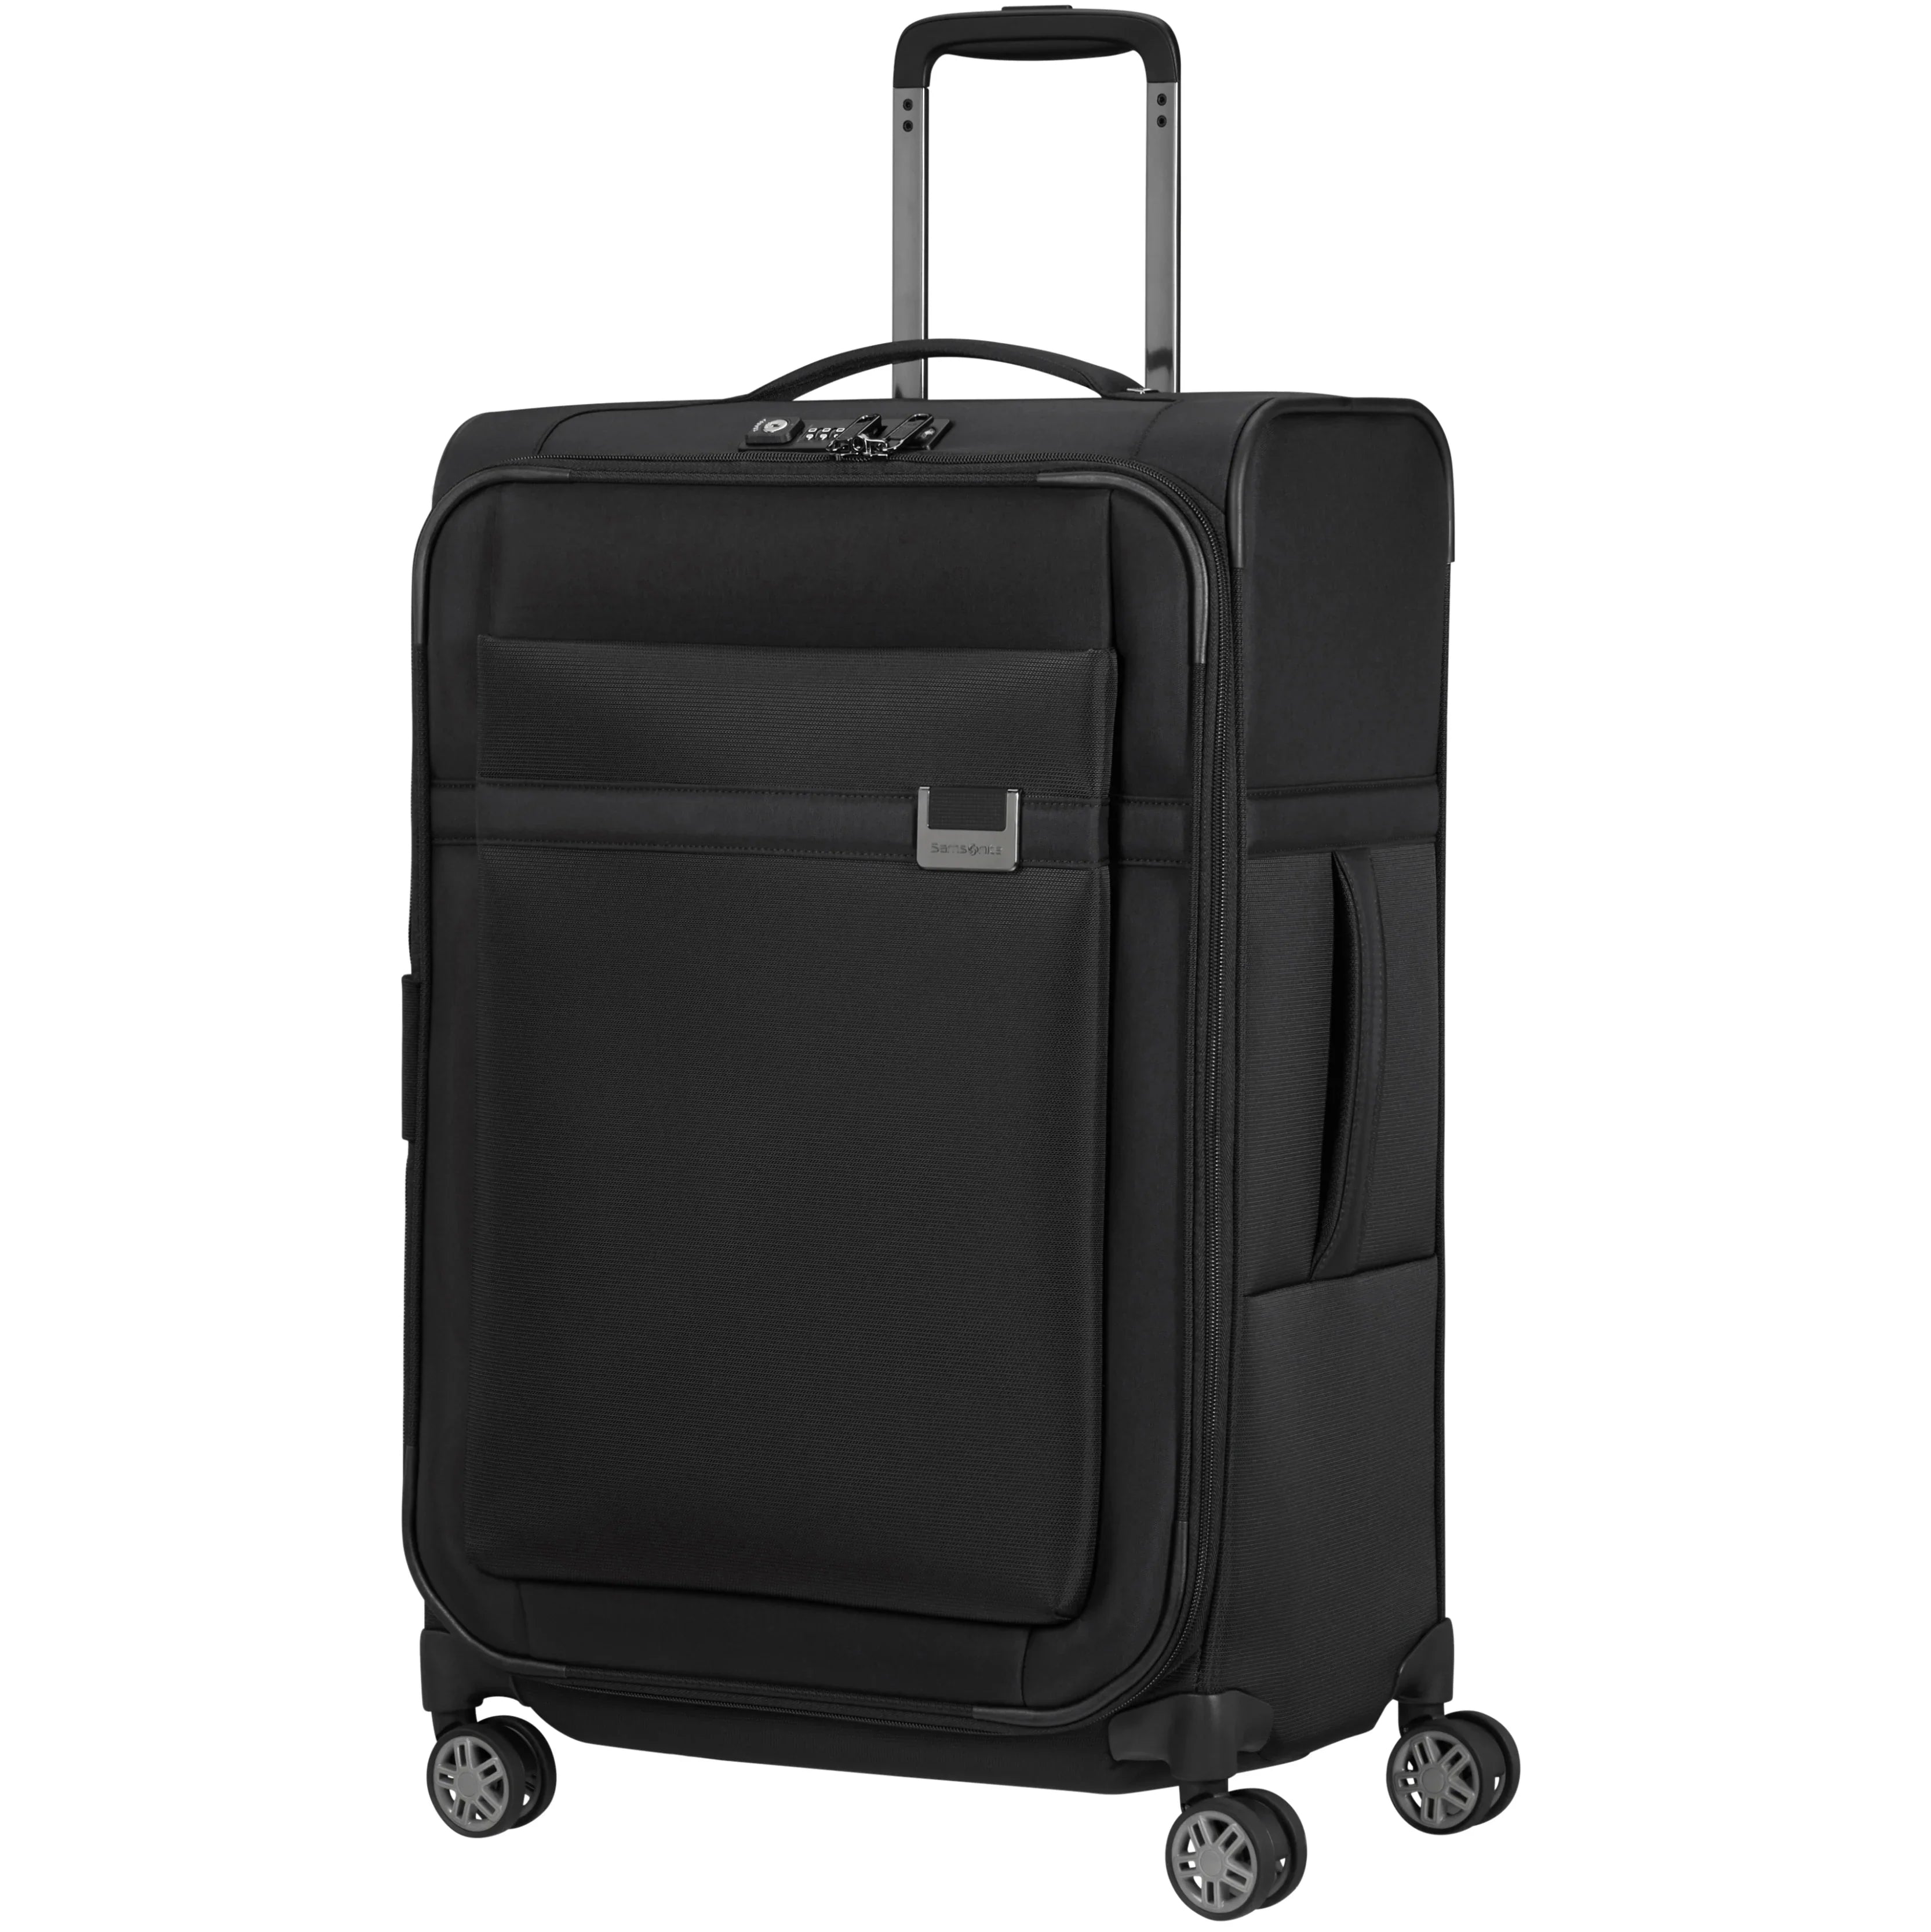 Greatly reduced luggage here in the sale – Page 3